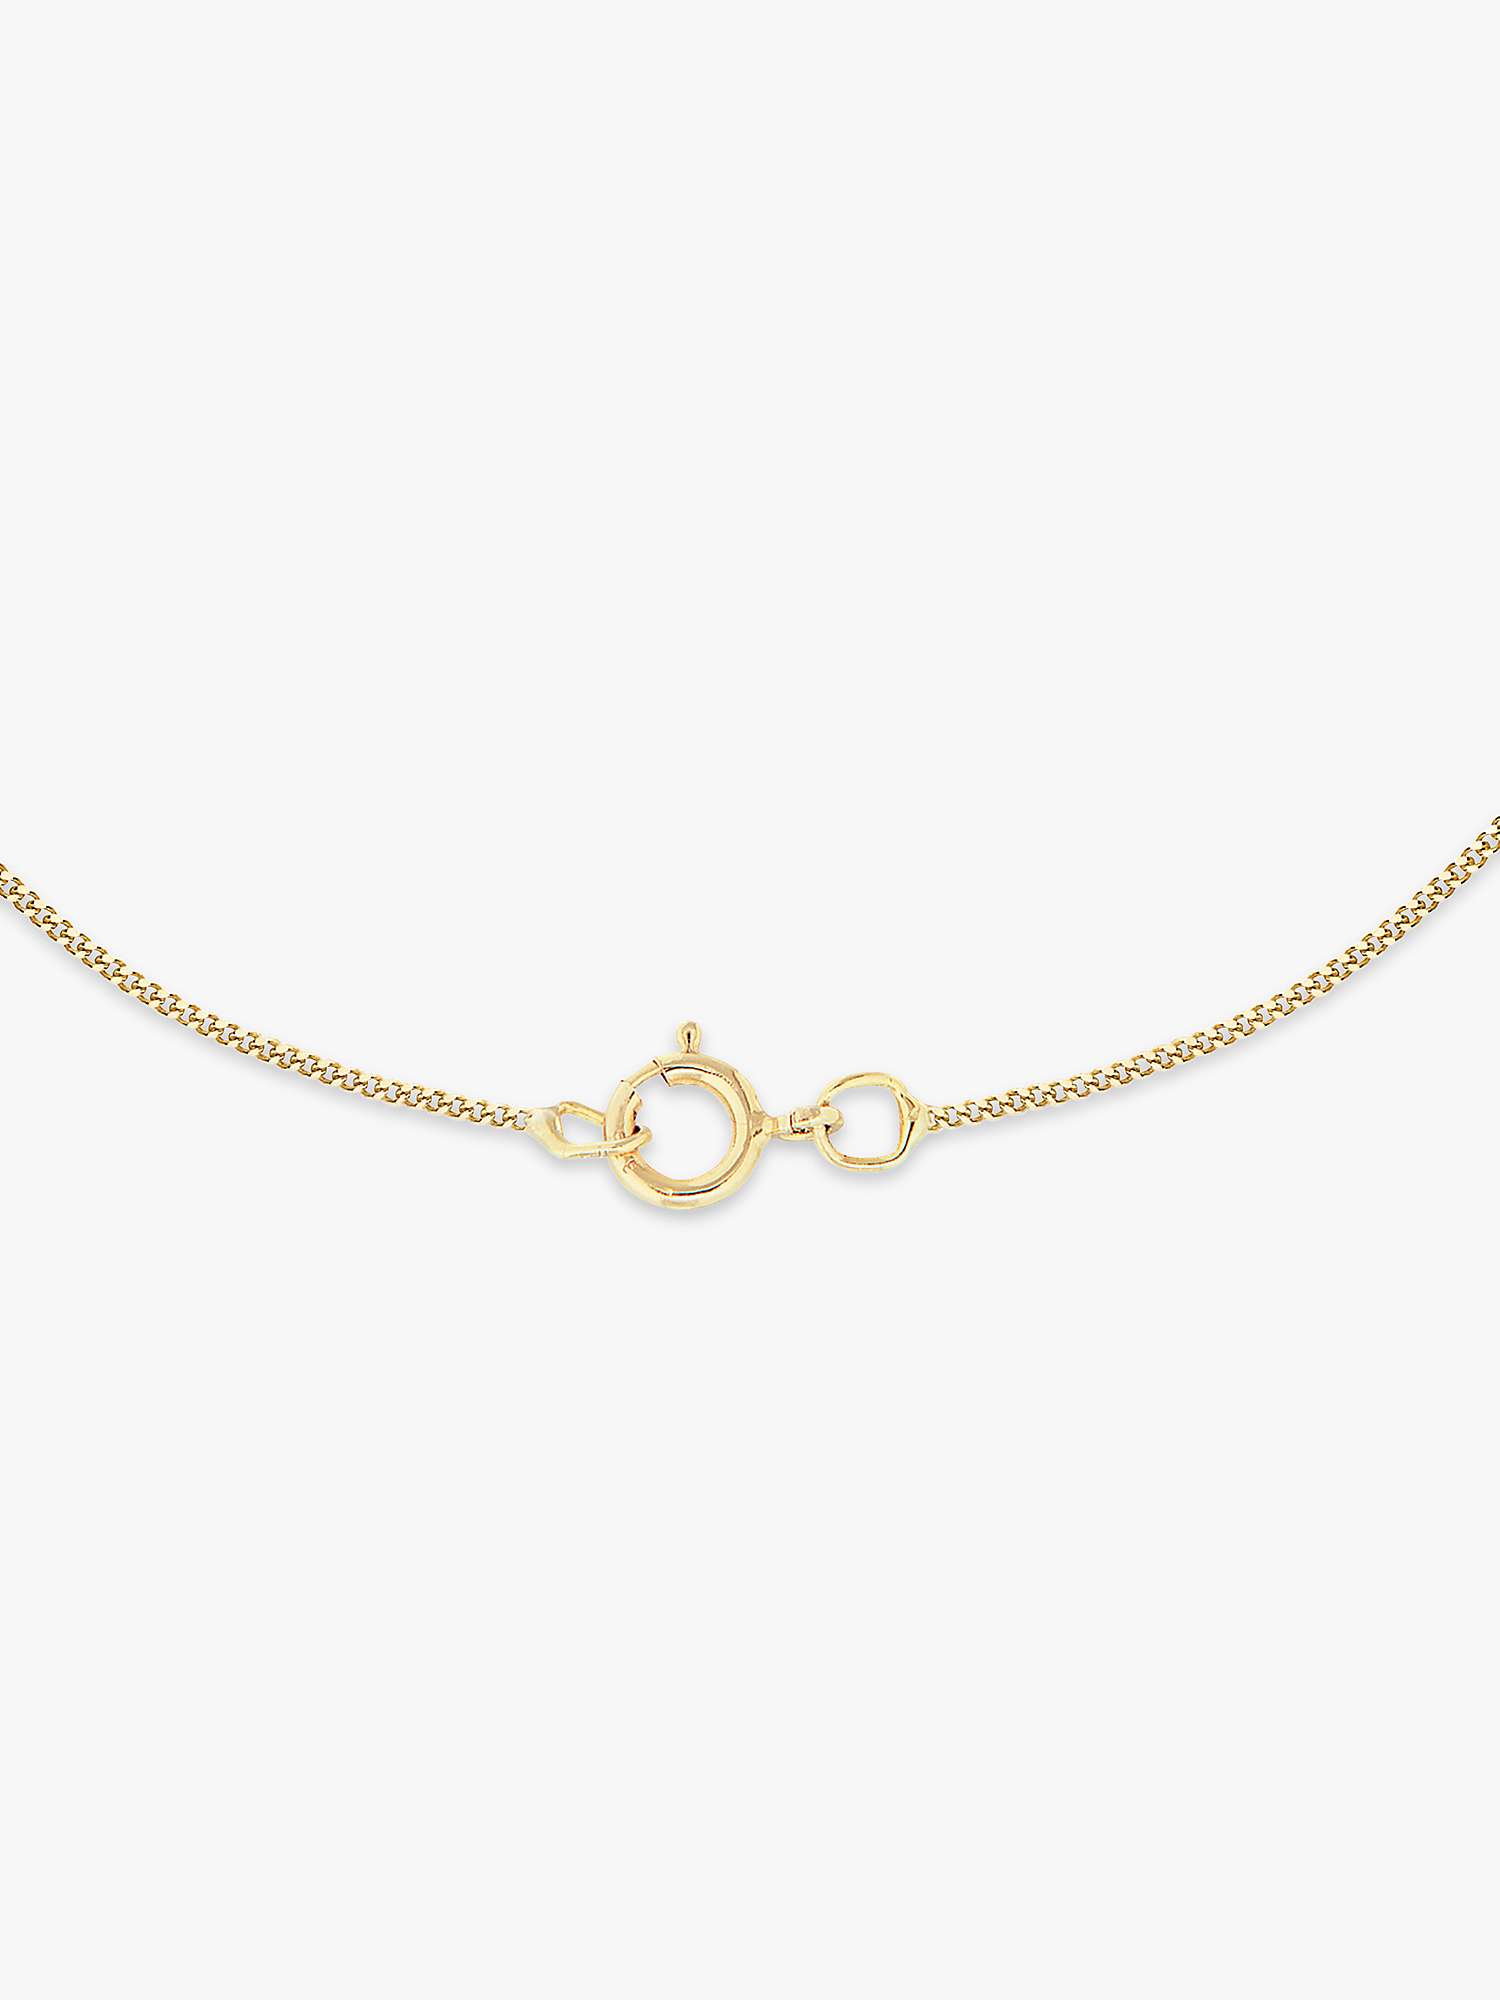 Buy IBB 9ct Yellow Gold Zodiac Necklace Online at johnlewis.com